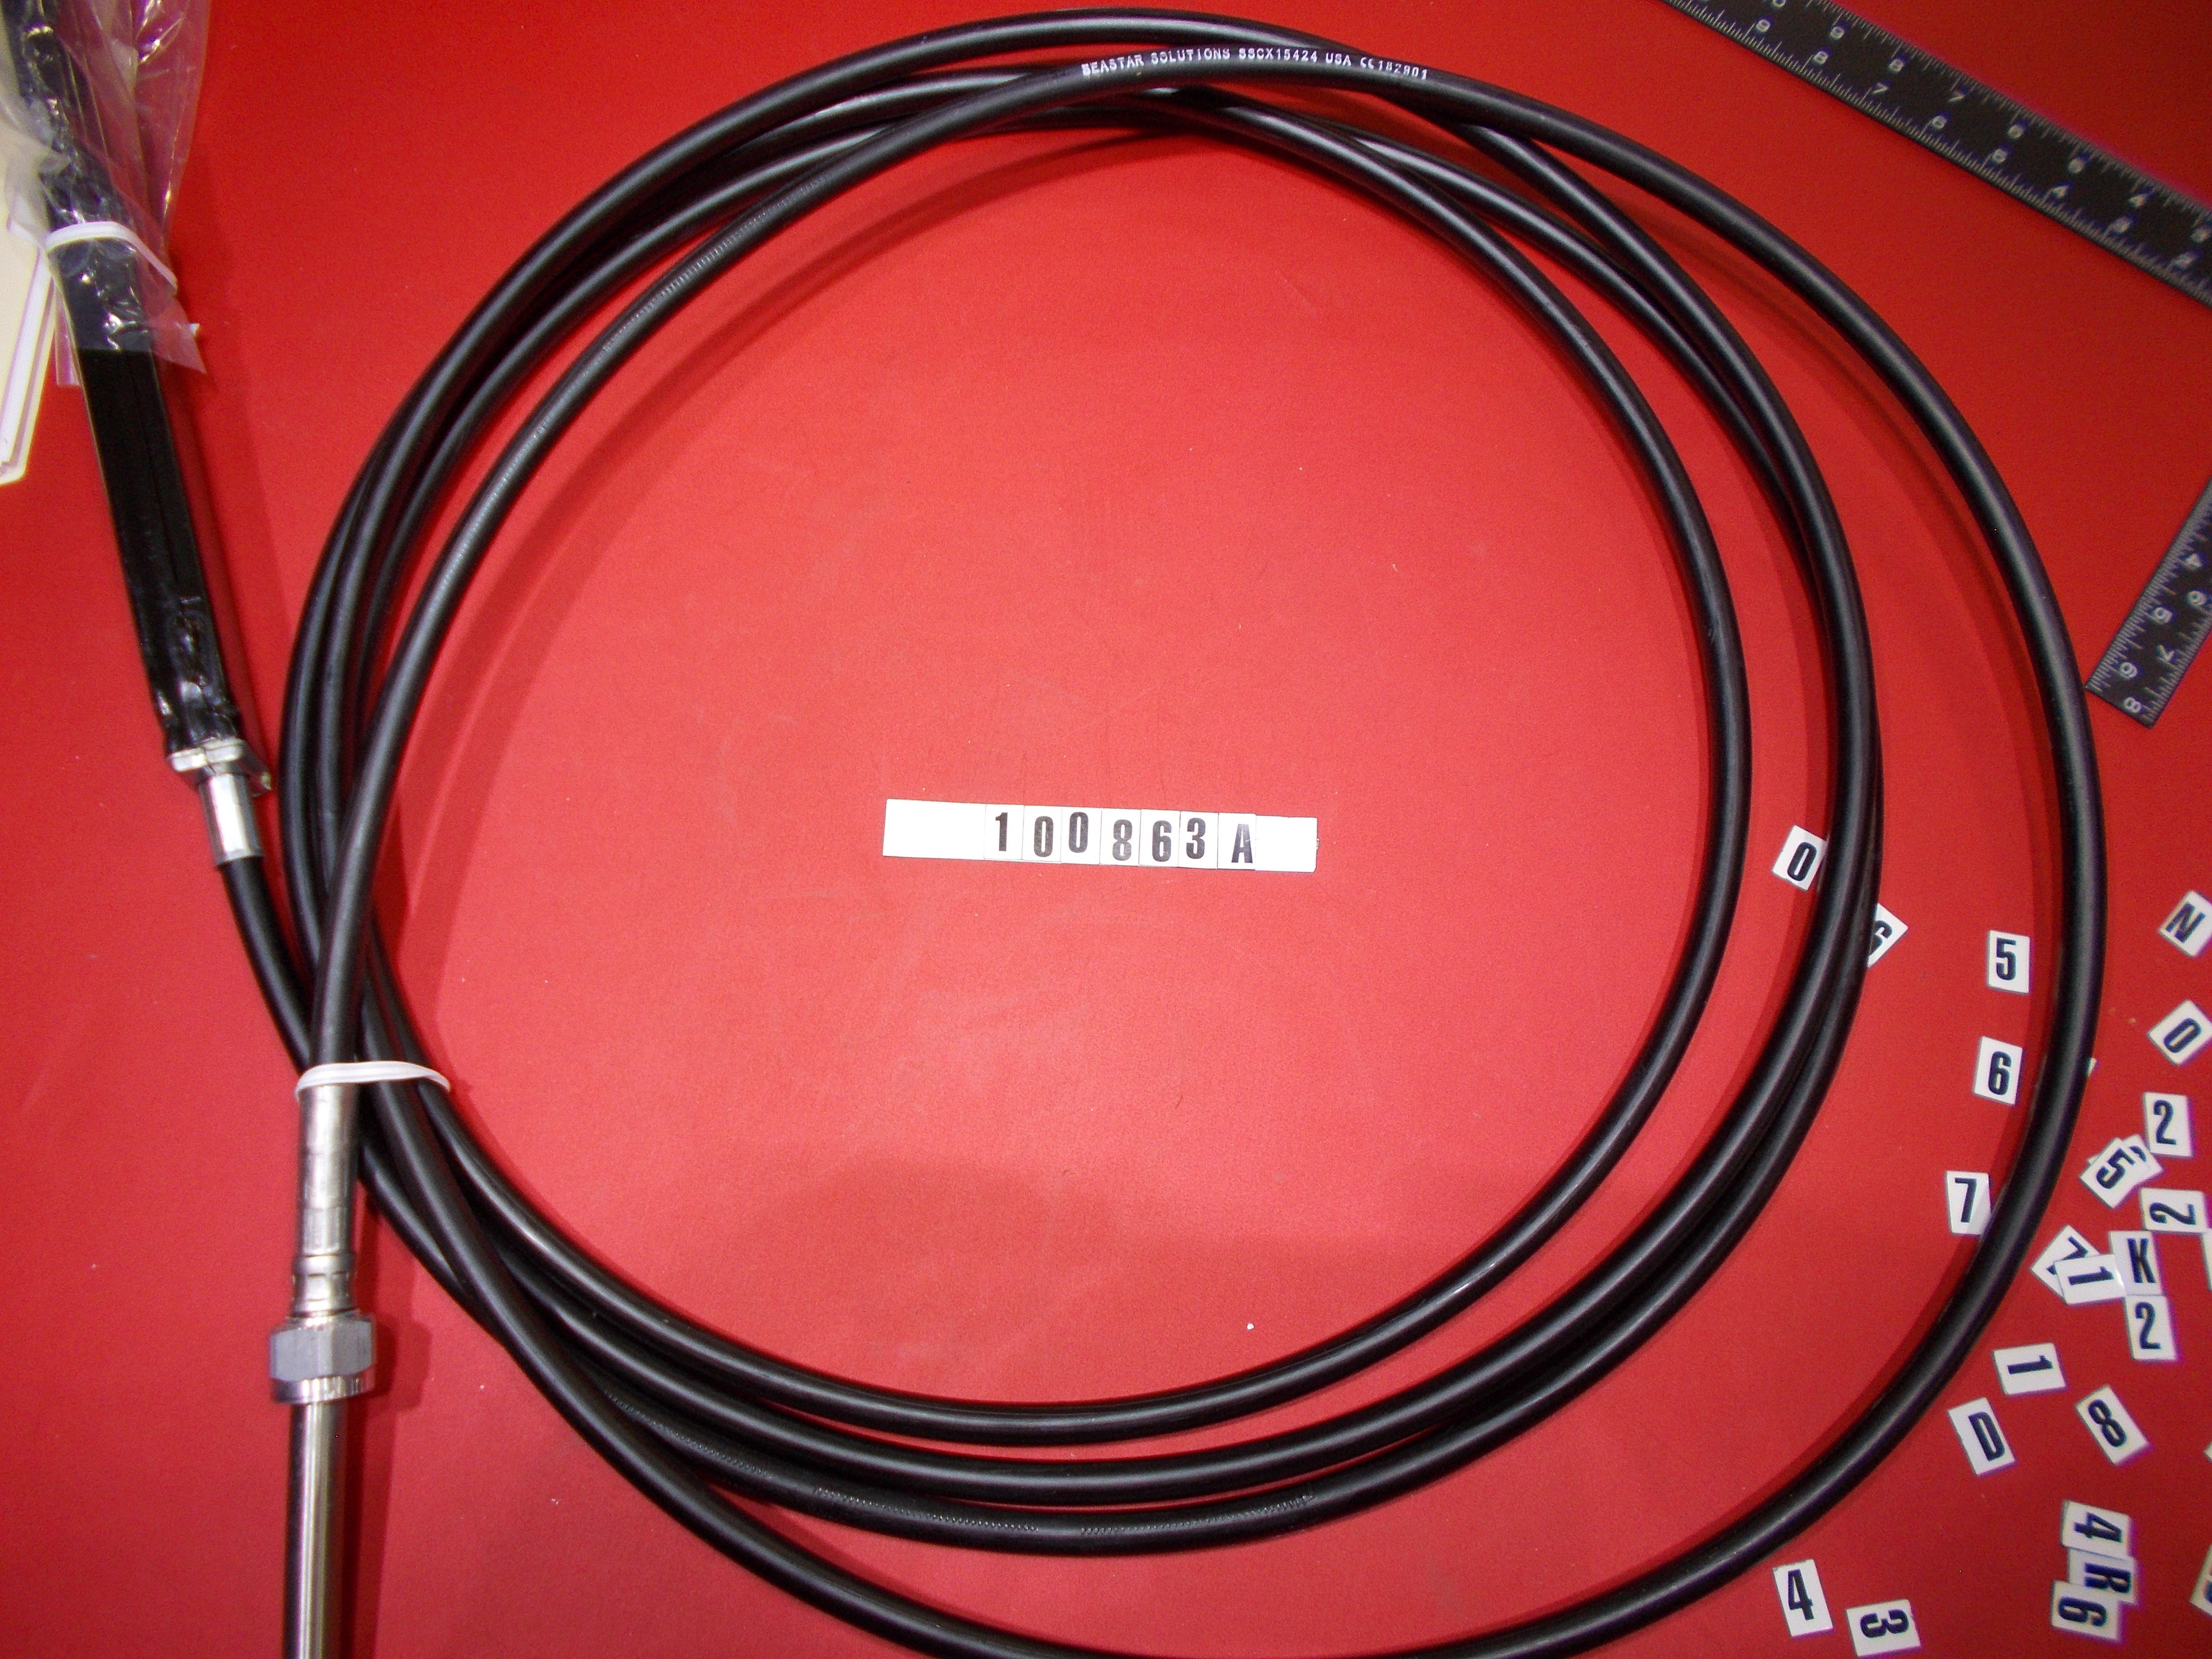 Replaced by Part# 100863P : 24' STEERING CABLE - ANTI BINDING - REV A